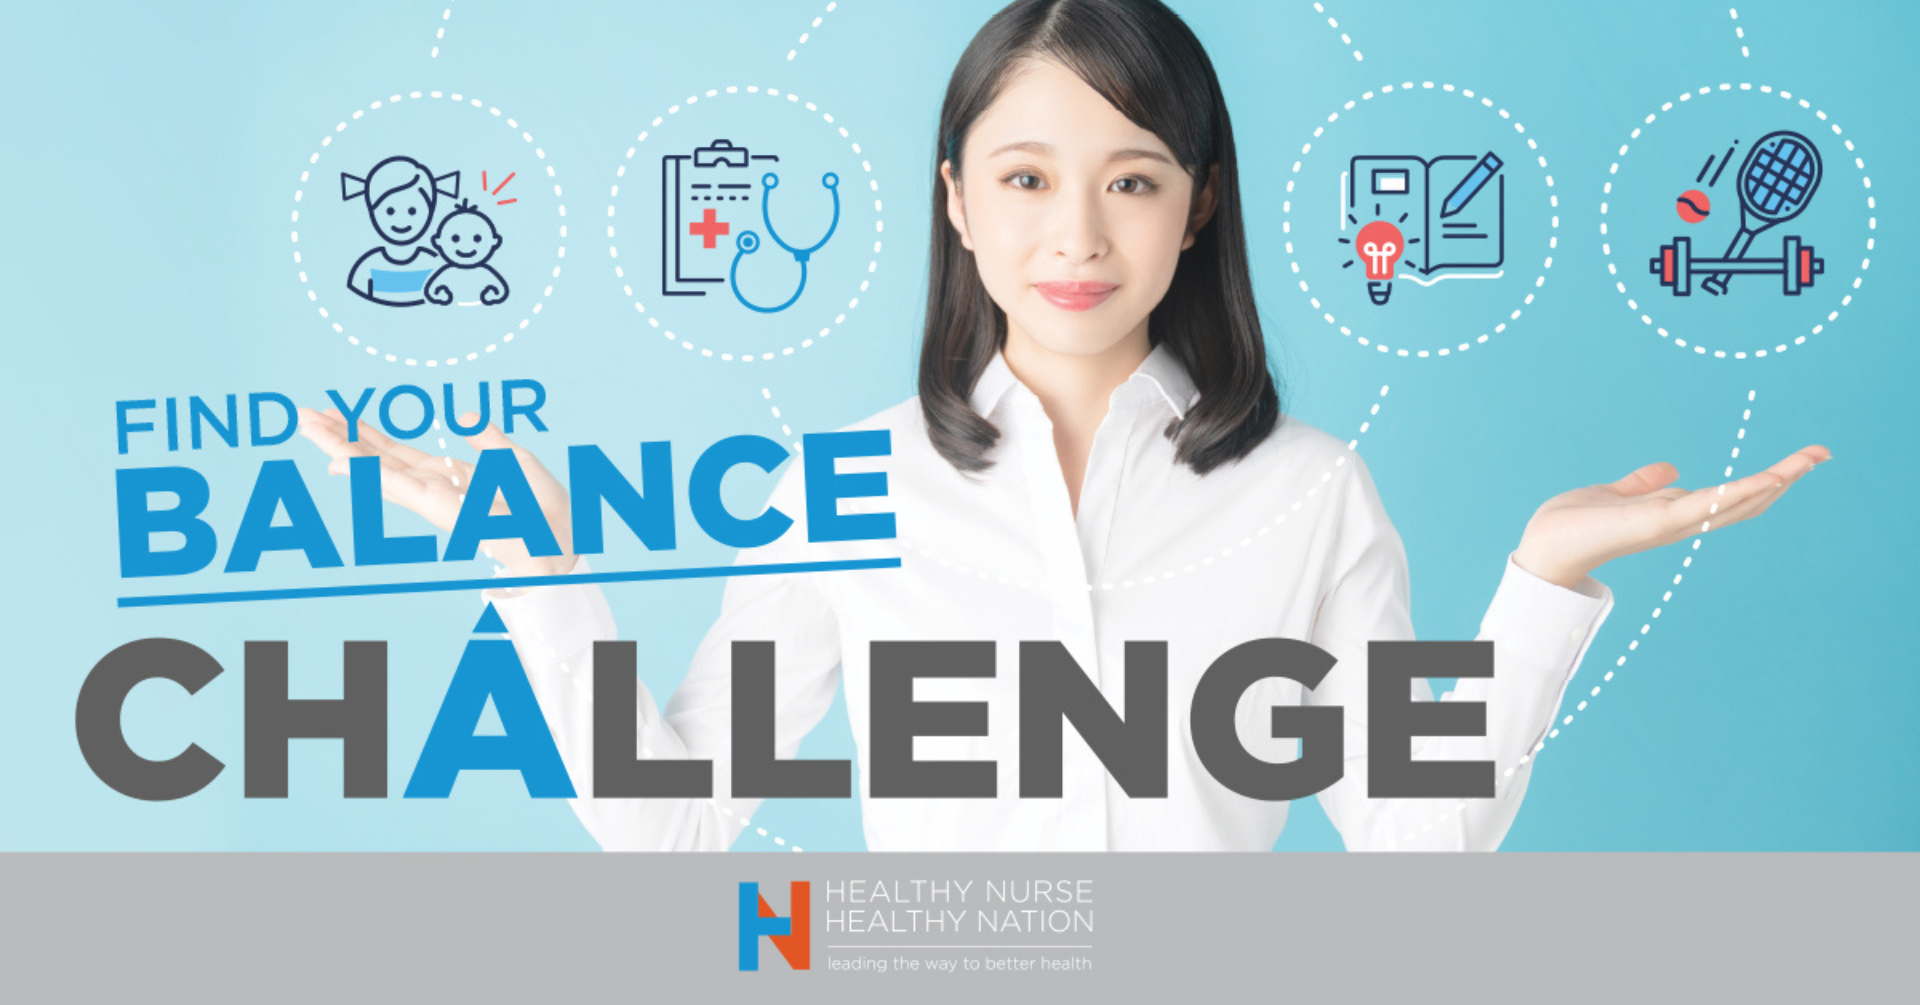 Stay Mindful - Healthy Nurse, Healthy Nation - Find Your Balance challenge - Day 10 4656